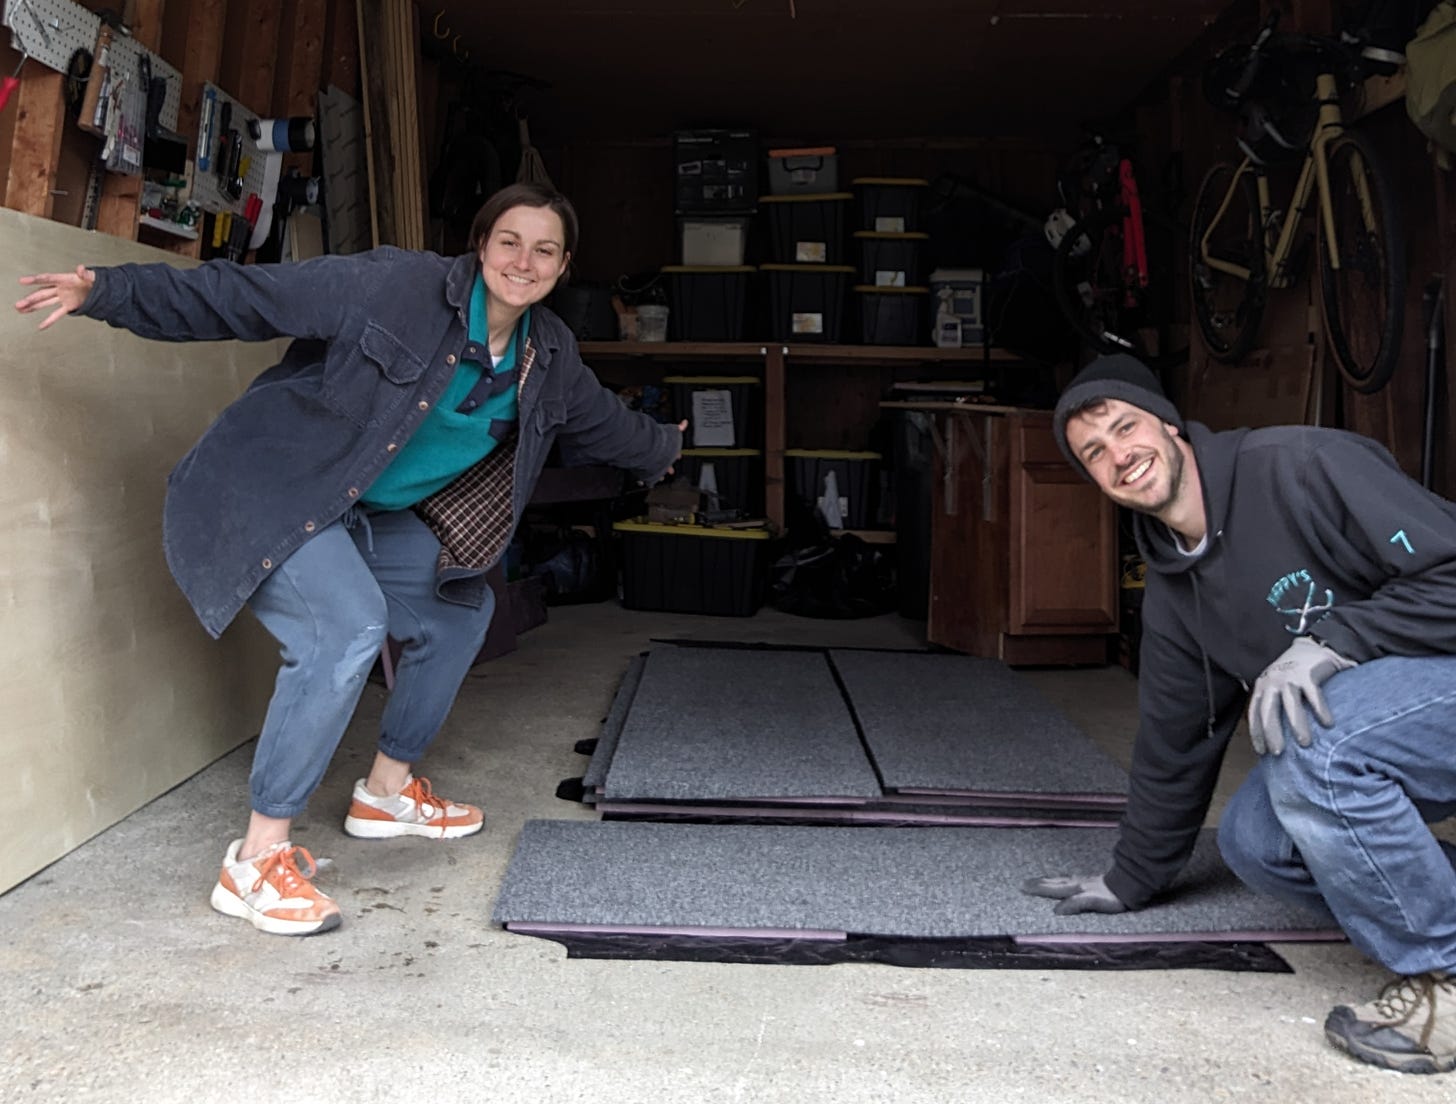 Author and her husband posing in their garage next to 4 sheets of XPS foam they recently upholstered to use in their truck camper